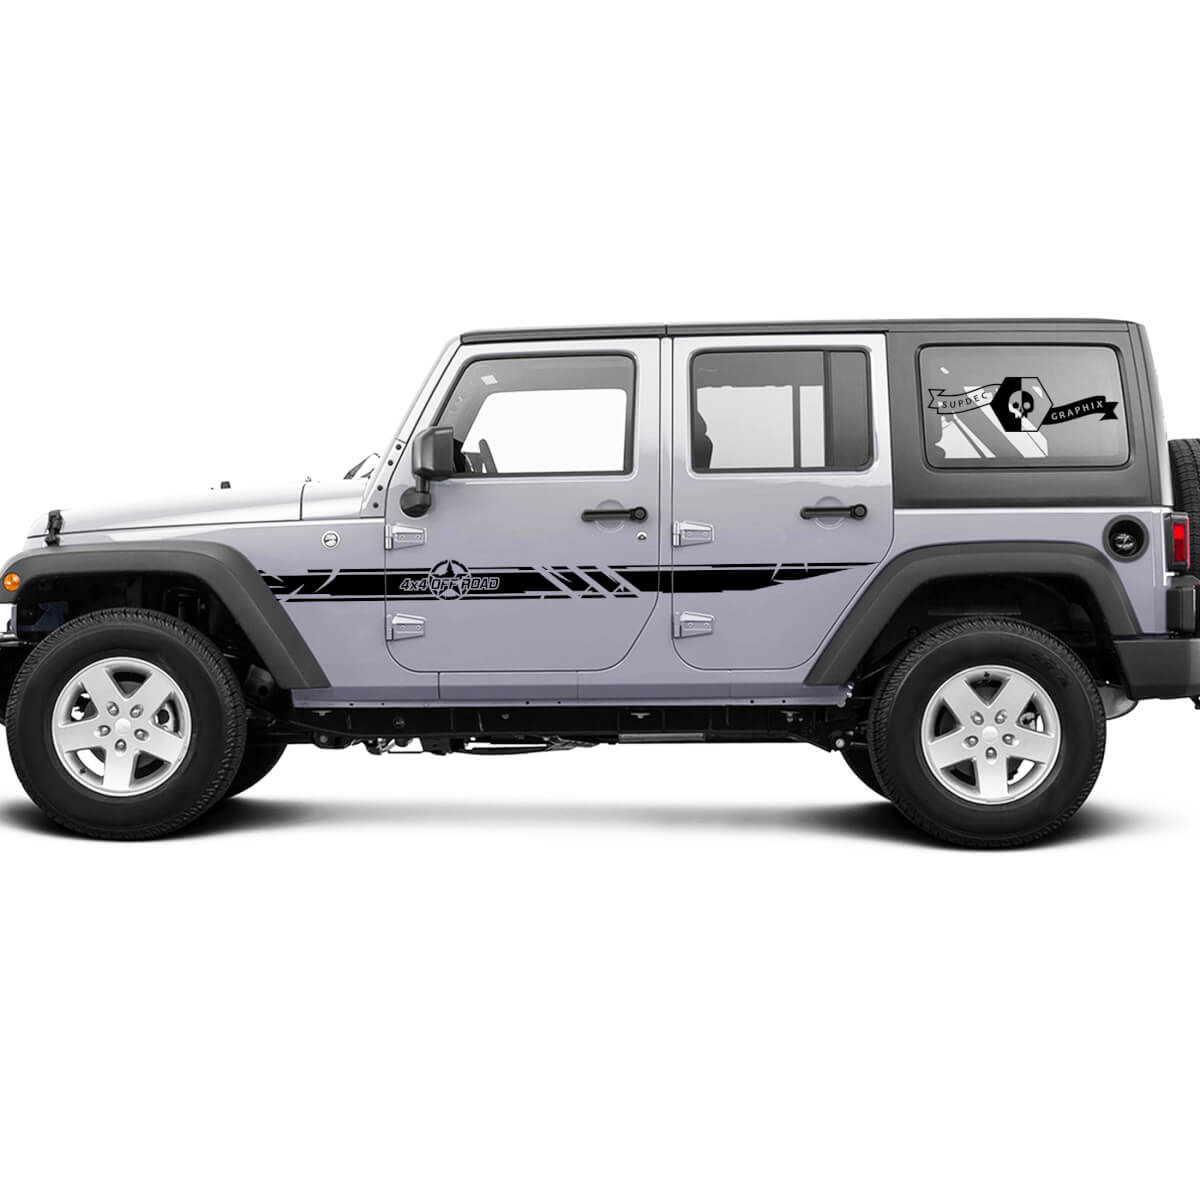 2 Side Jeep Wrangler Destroyed Military Army Star 4x4 Off-Road Doors Side Vinyl Decals Graphics Sticker